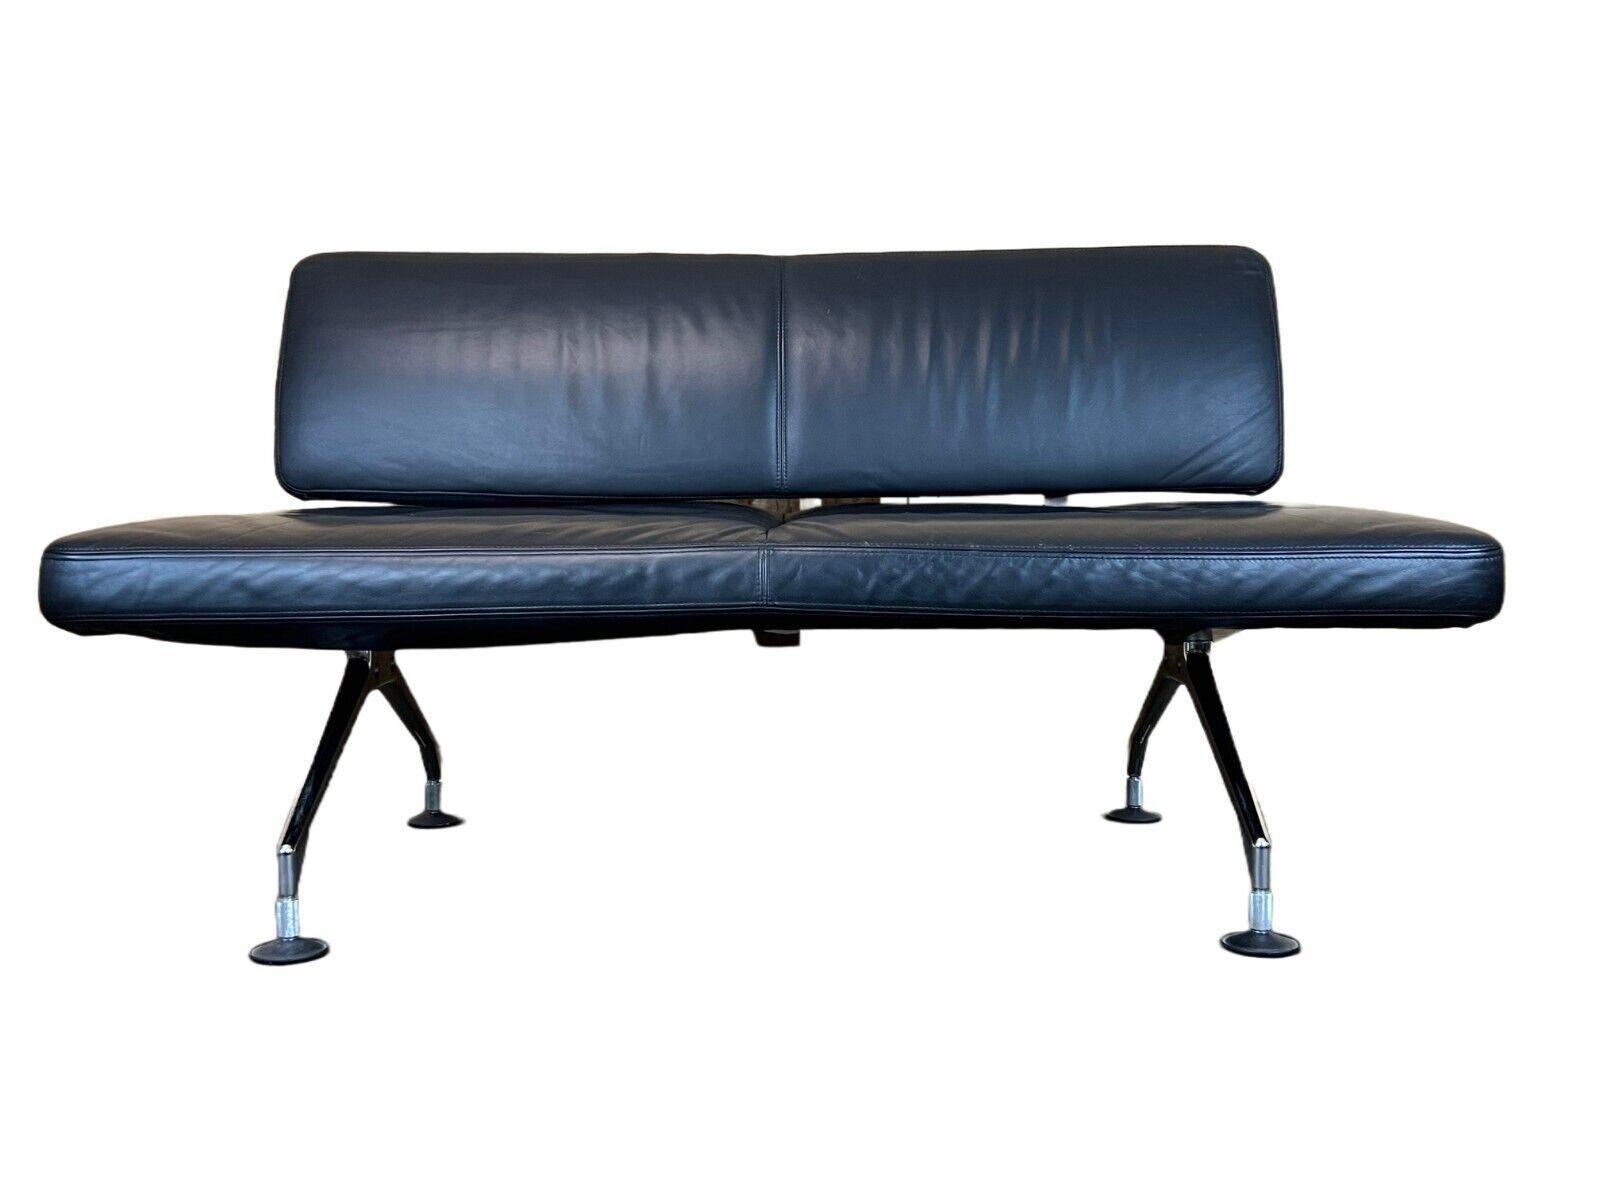 1990s Area Lounge Sofa Leather Sofa by Antonio Citterio for Vitra Chrom Design

Object: sofa

Manufacturer: Vitra

Condition: good - vintage

Age: around 1990

Dimensions:

Width = 150cm
Depth = 70cm
Height = 80cm
Seat height =